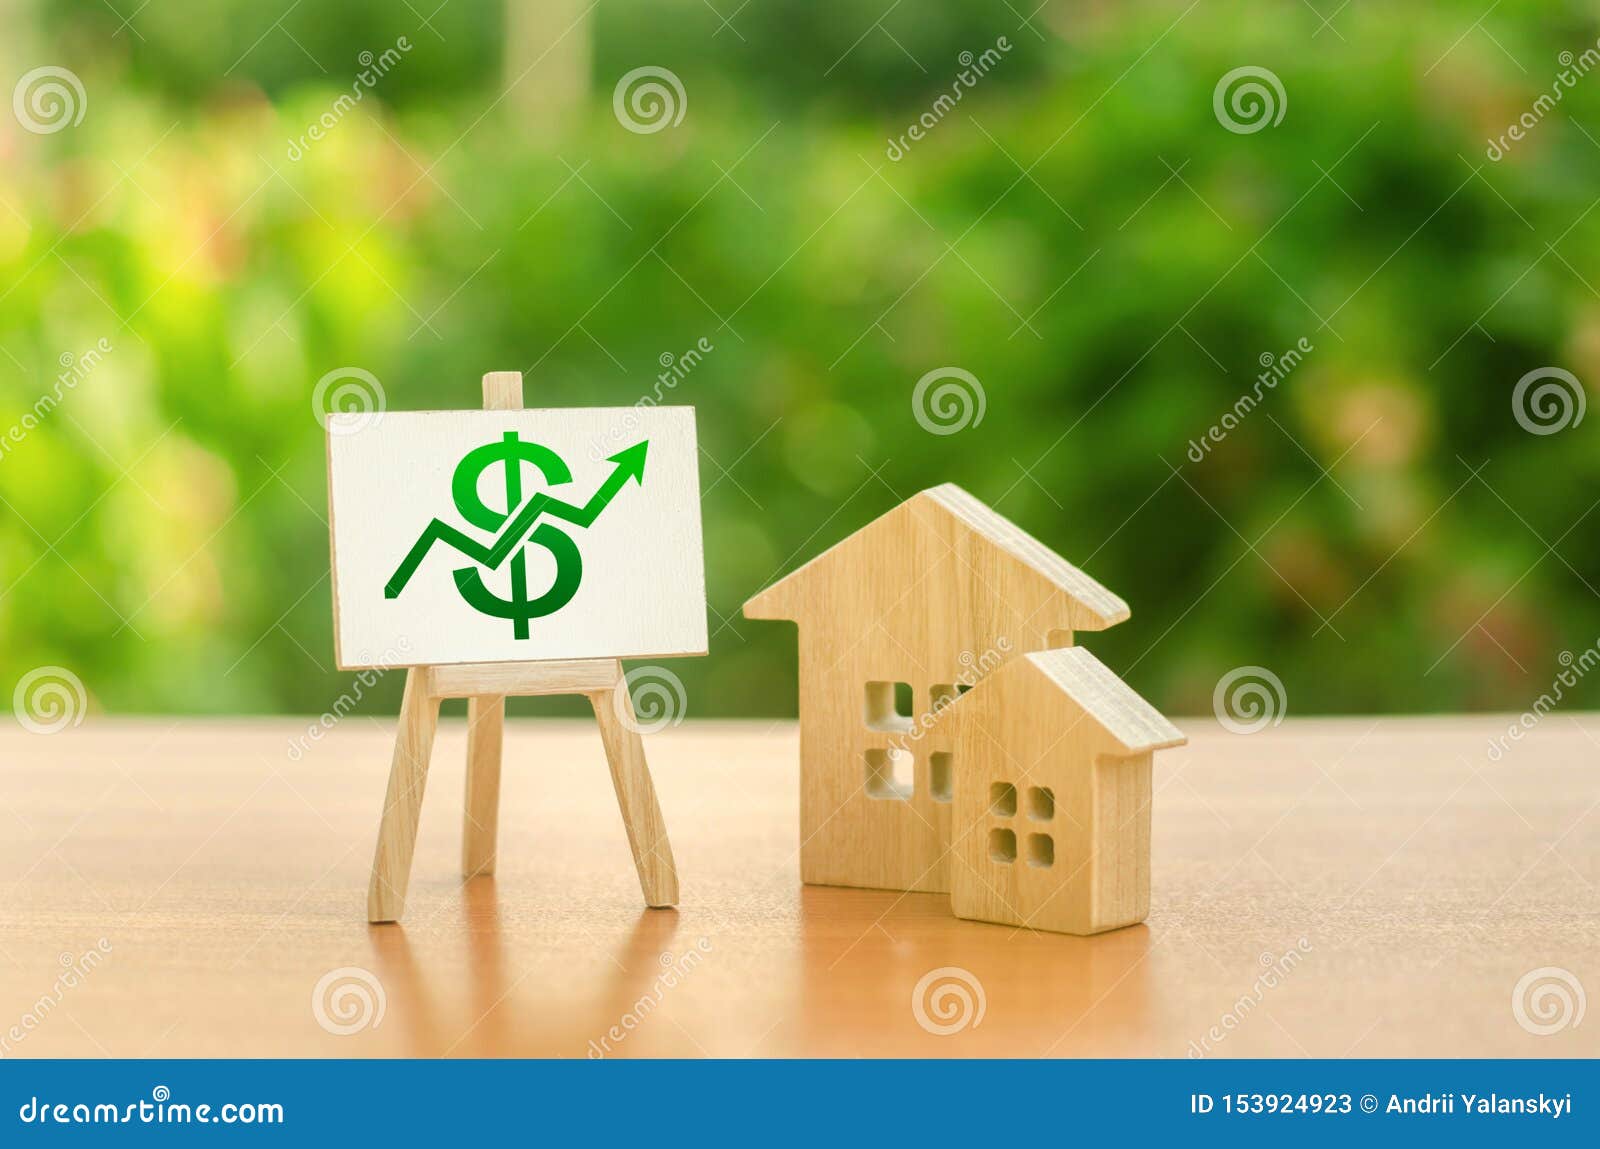 two wooden houses and a green up arrow on the sign. real estate value increase. rising prices for housing, building maintenance.